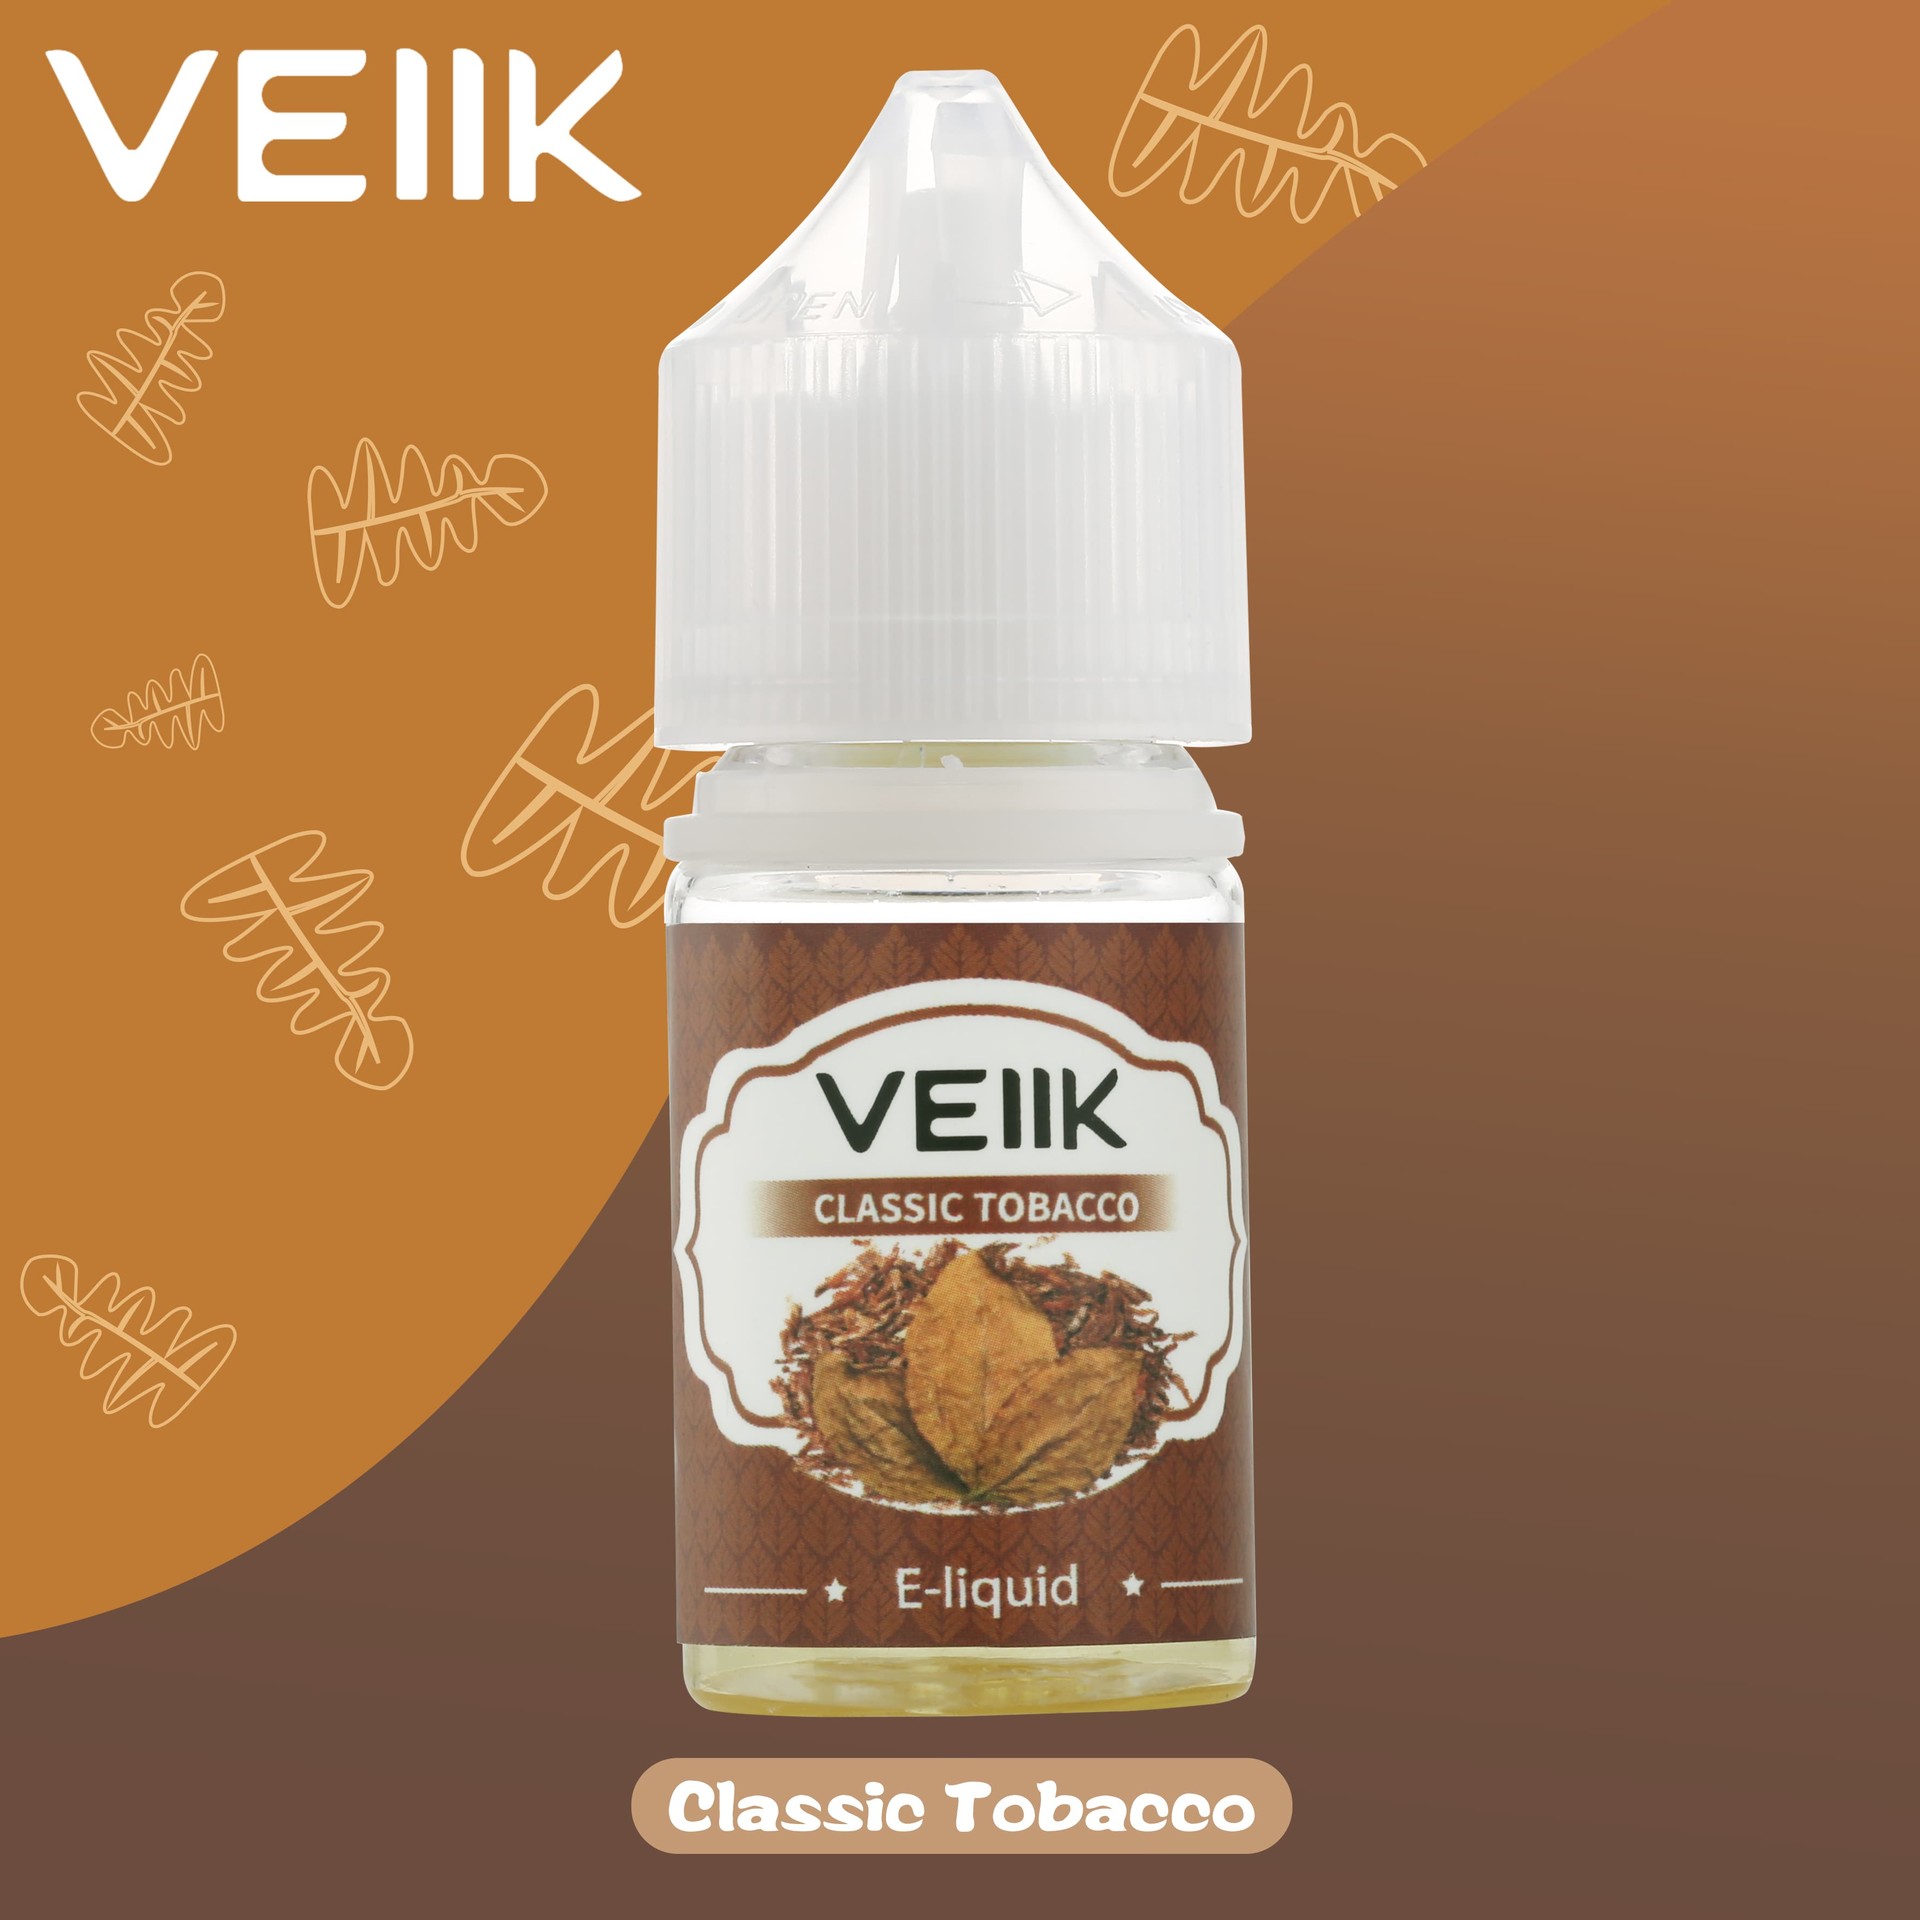 VEIIK exquisite electronic cigarette accessories great for vape pods